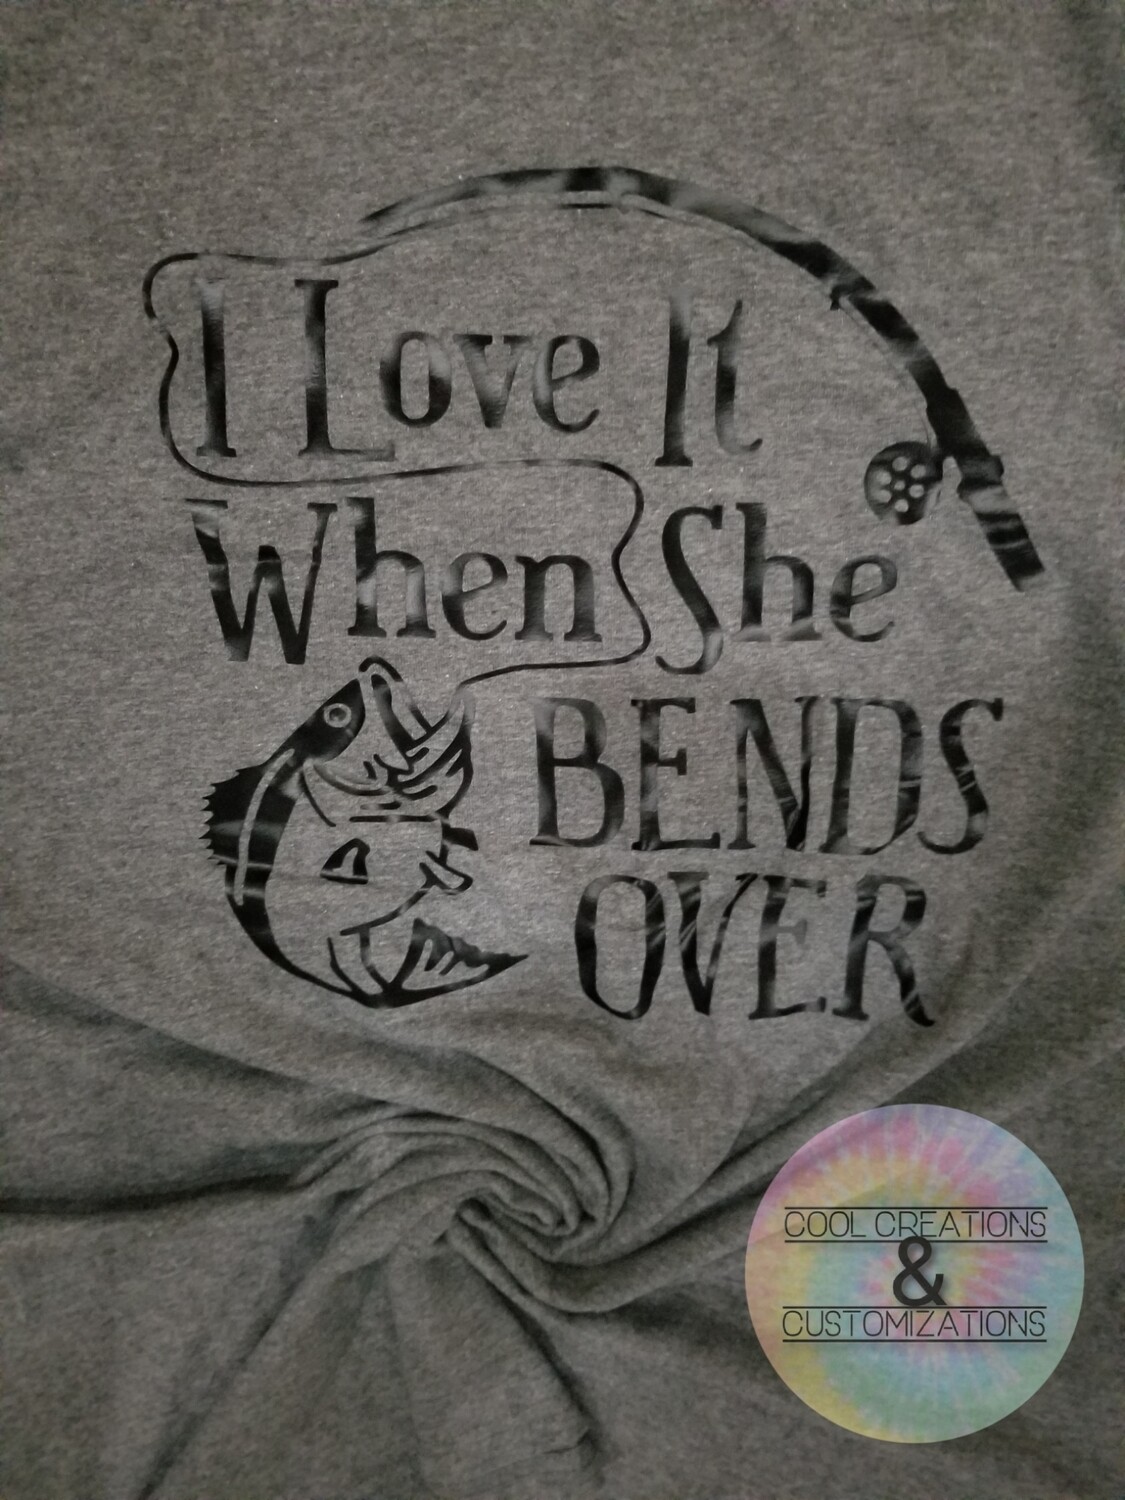 "I love it when she bends over" T-shirt